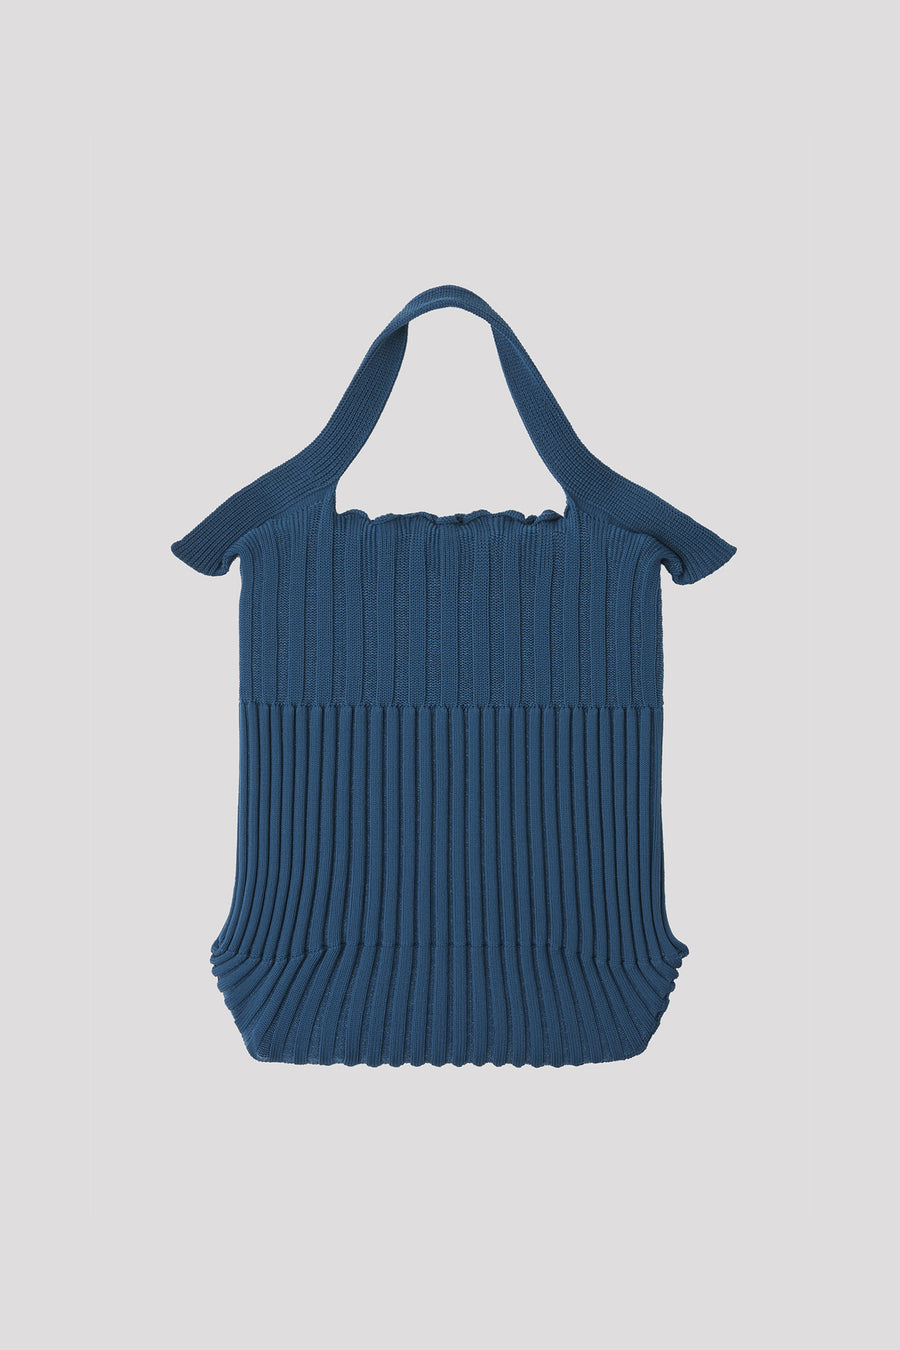 FLUTED TOTE BAG